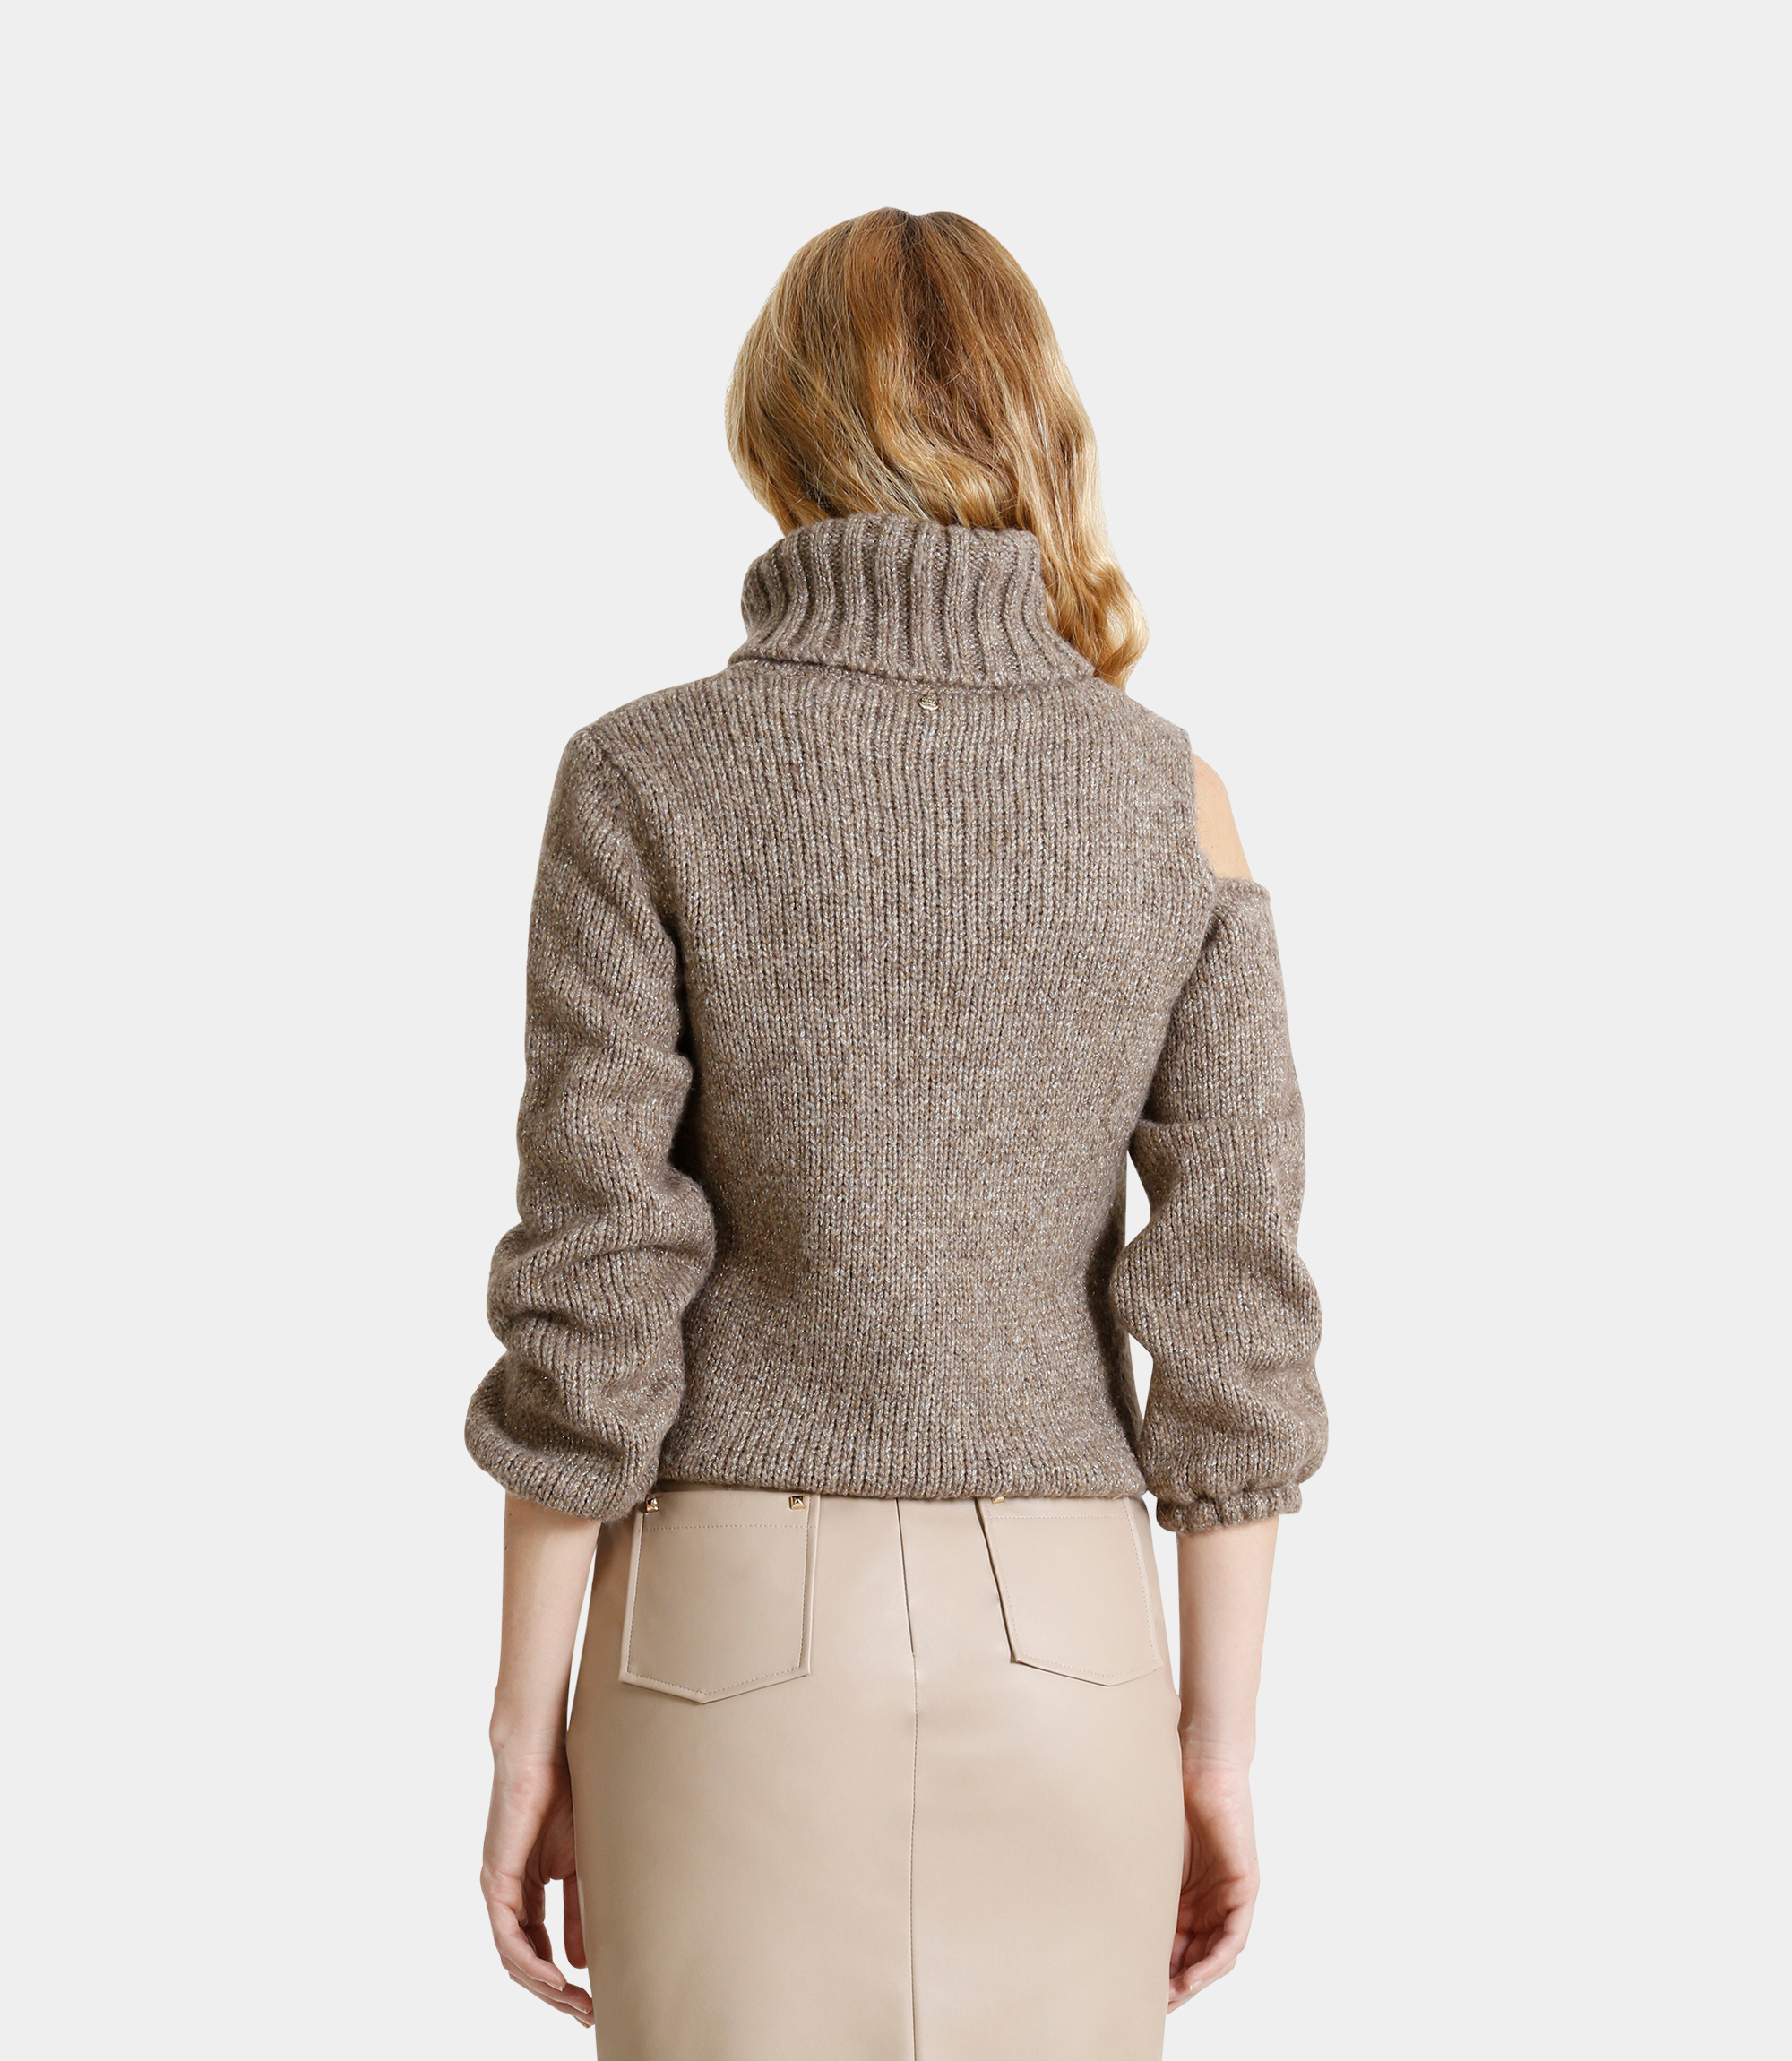 Turtleneck sweater with cut shoulder strap and tie at the waist - GREY - NaraMilano